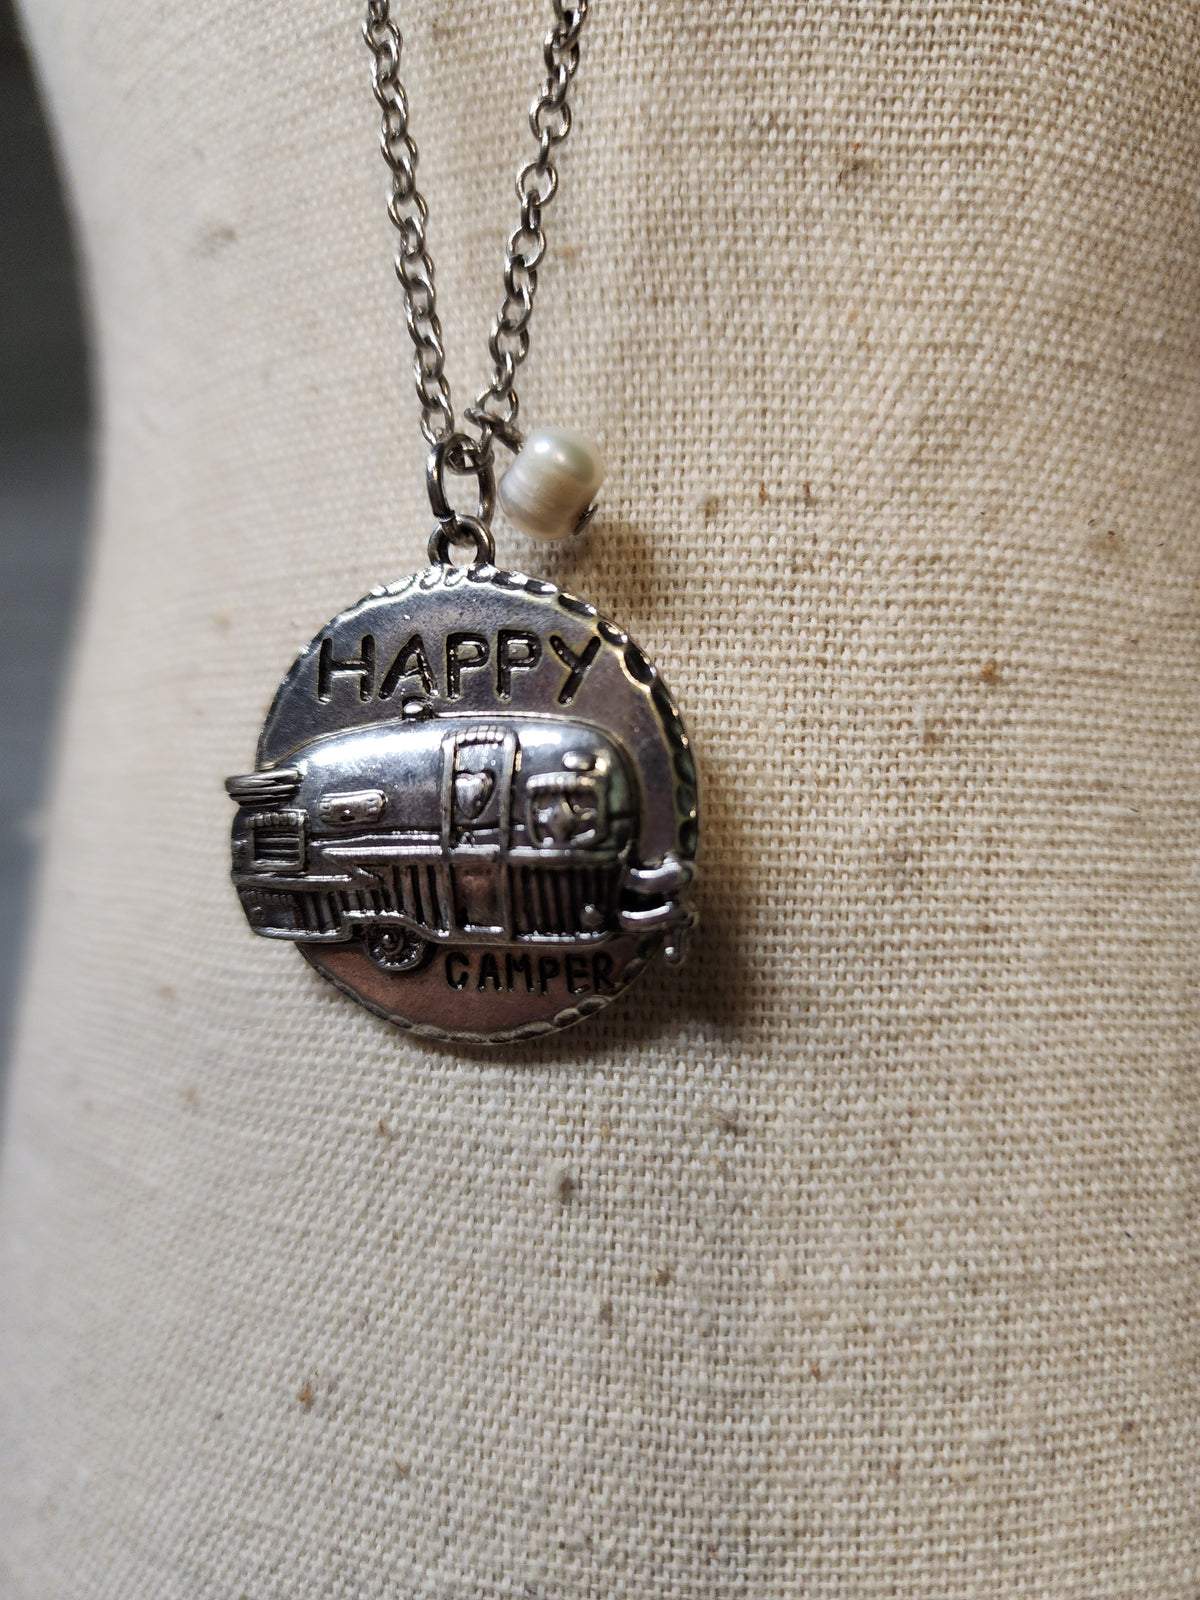 Happy Camper charm necklace